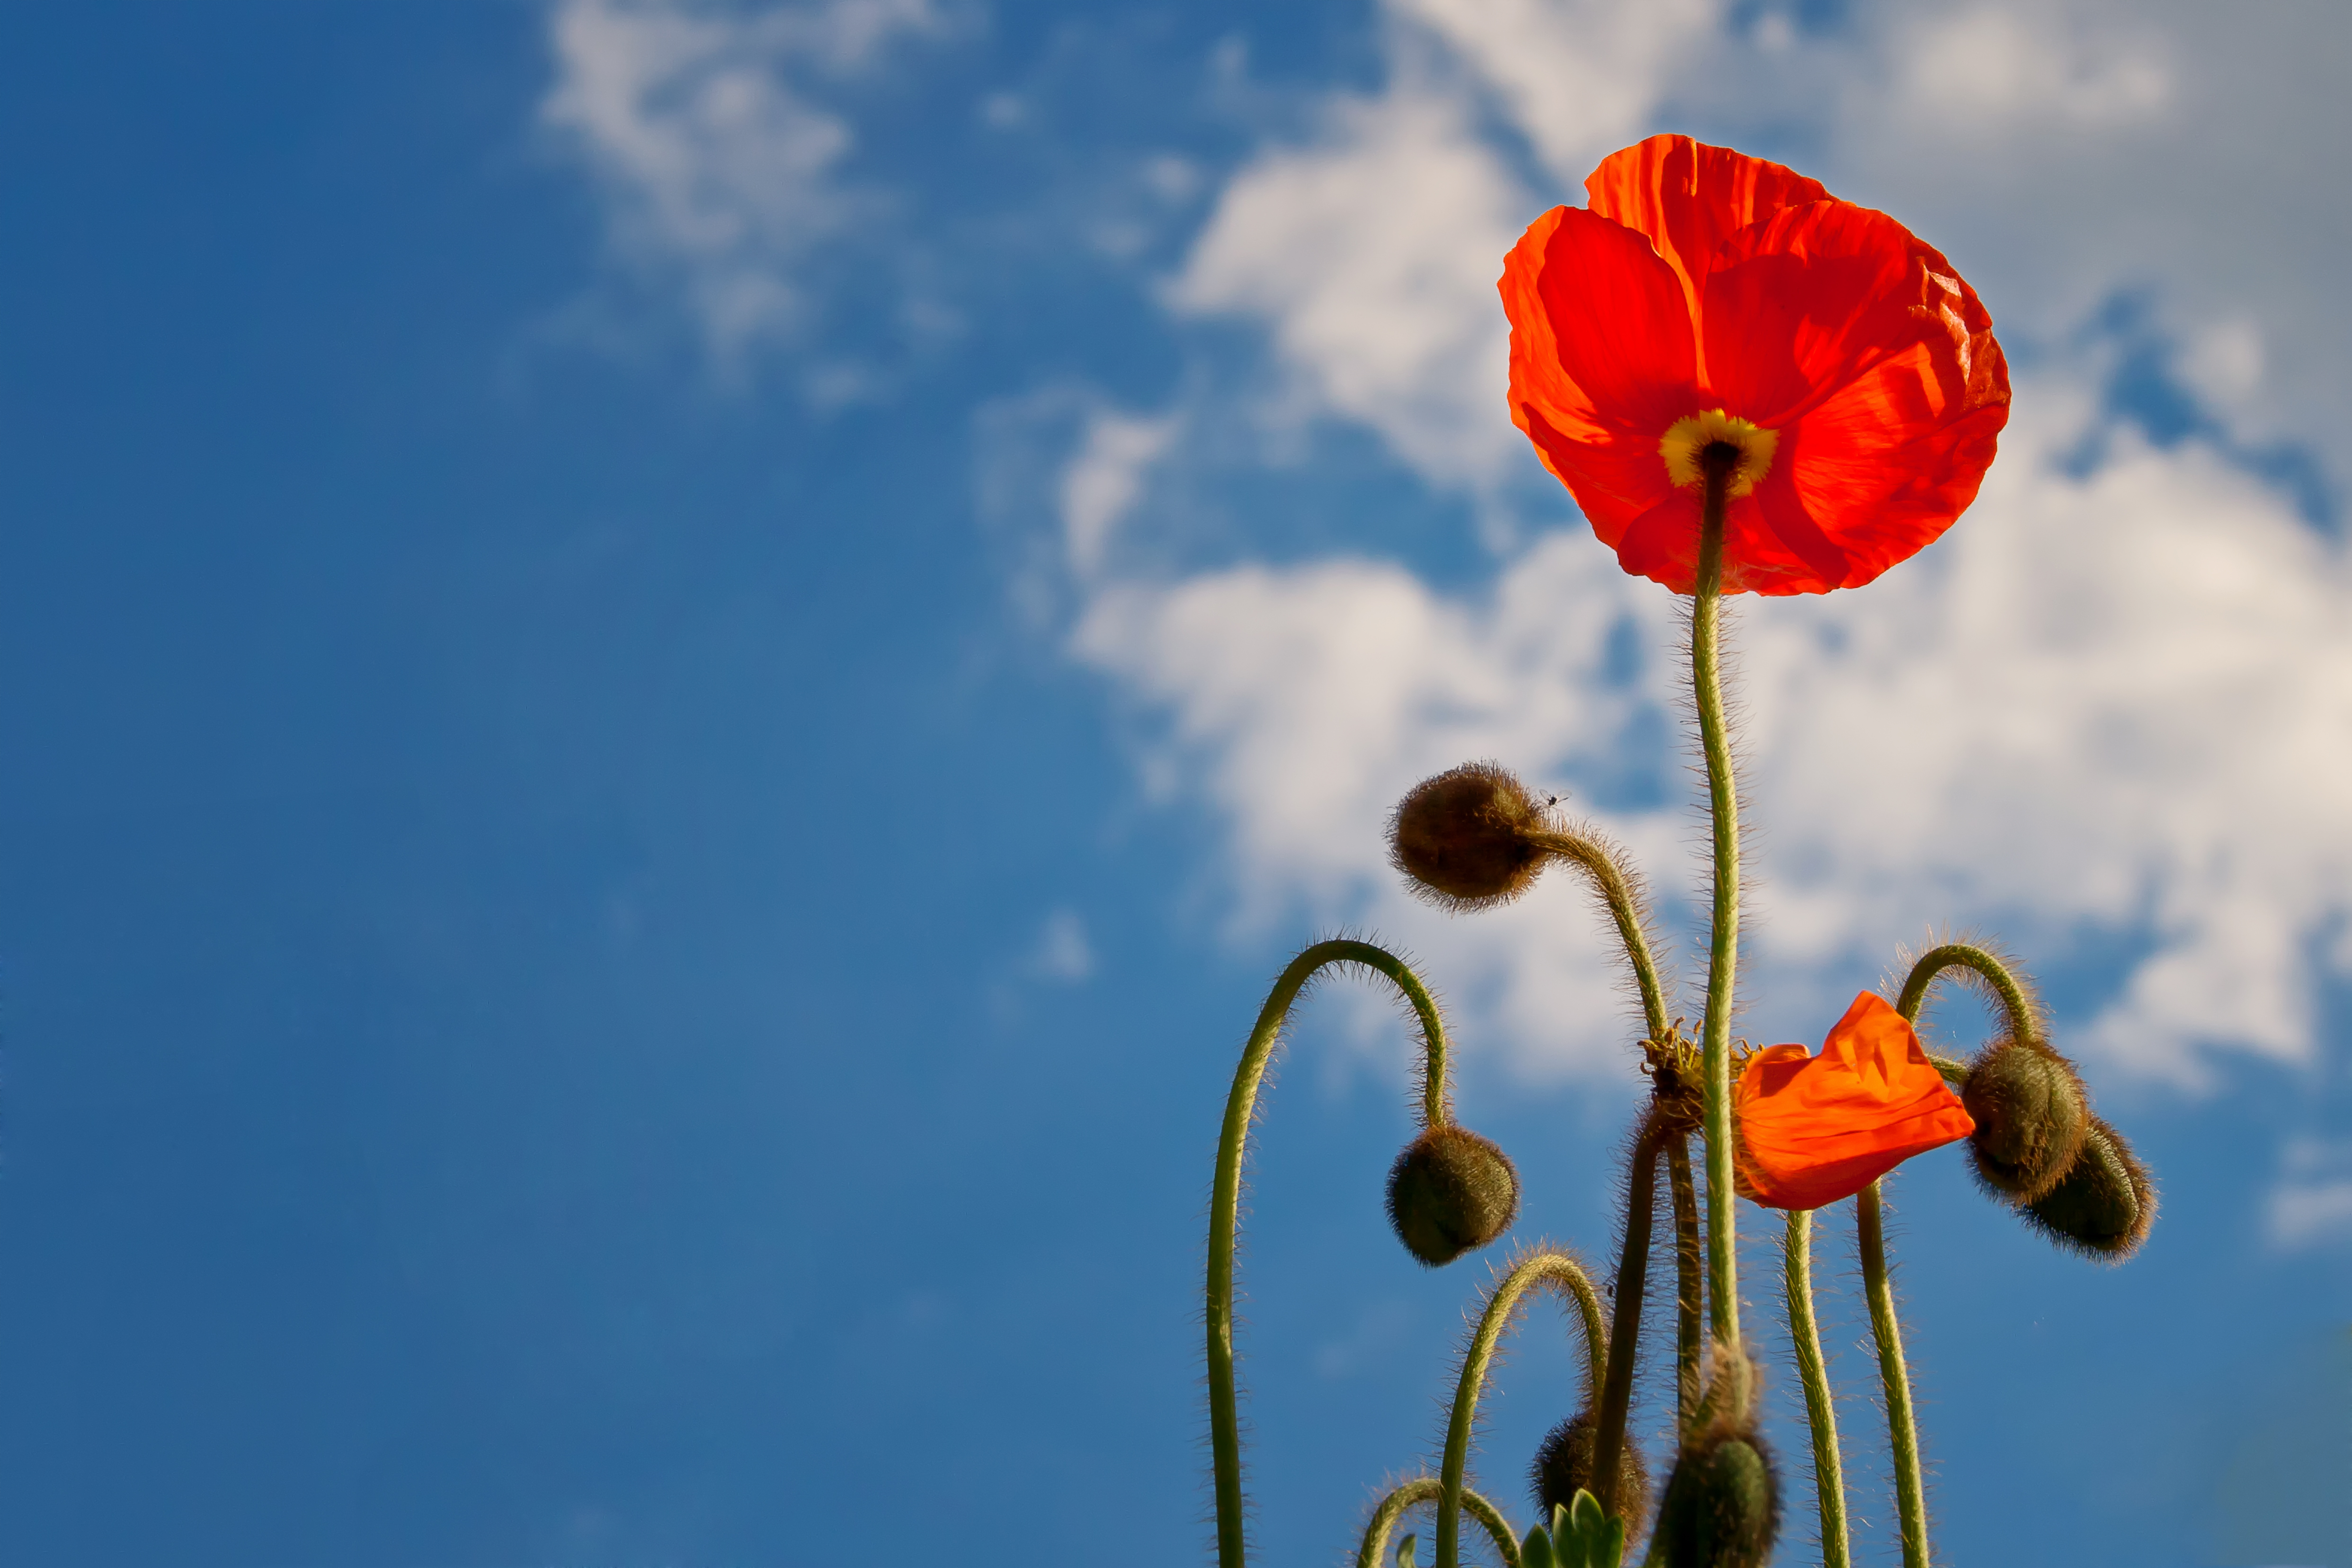 red petaled flower under white clouds and blue sky